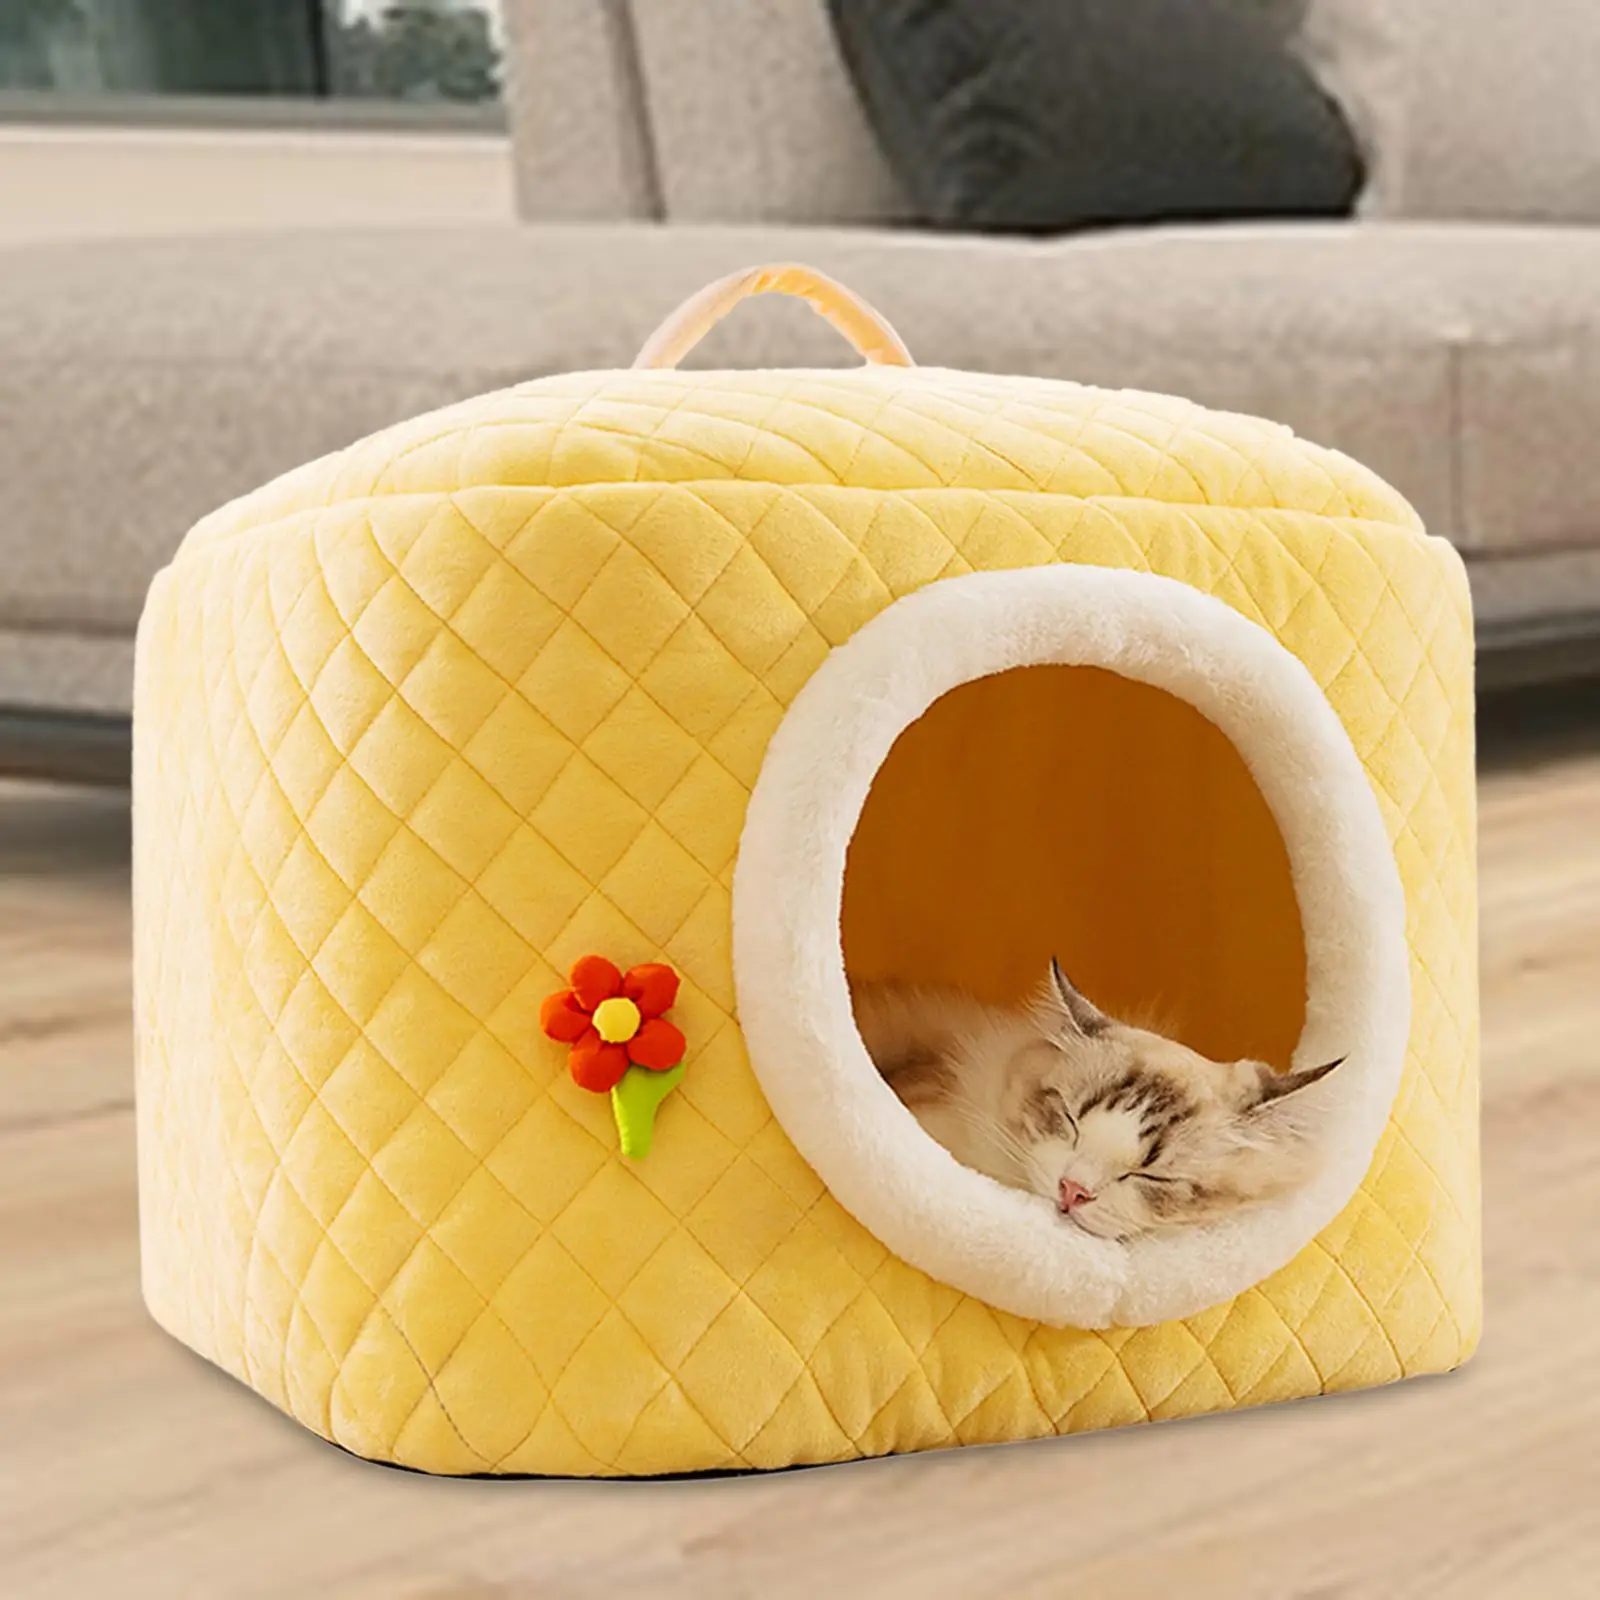 Cat Bed Cave Sleeping Soft Indoor Cats Potable with Handle Calming Cat Nest Pet Sleeping Bed Self Warming for Puppy Dog Kitten